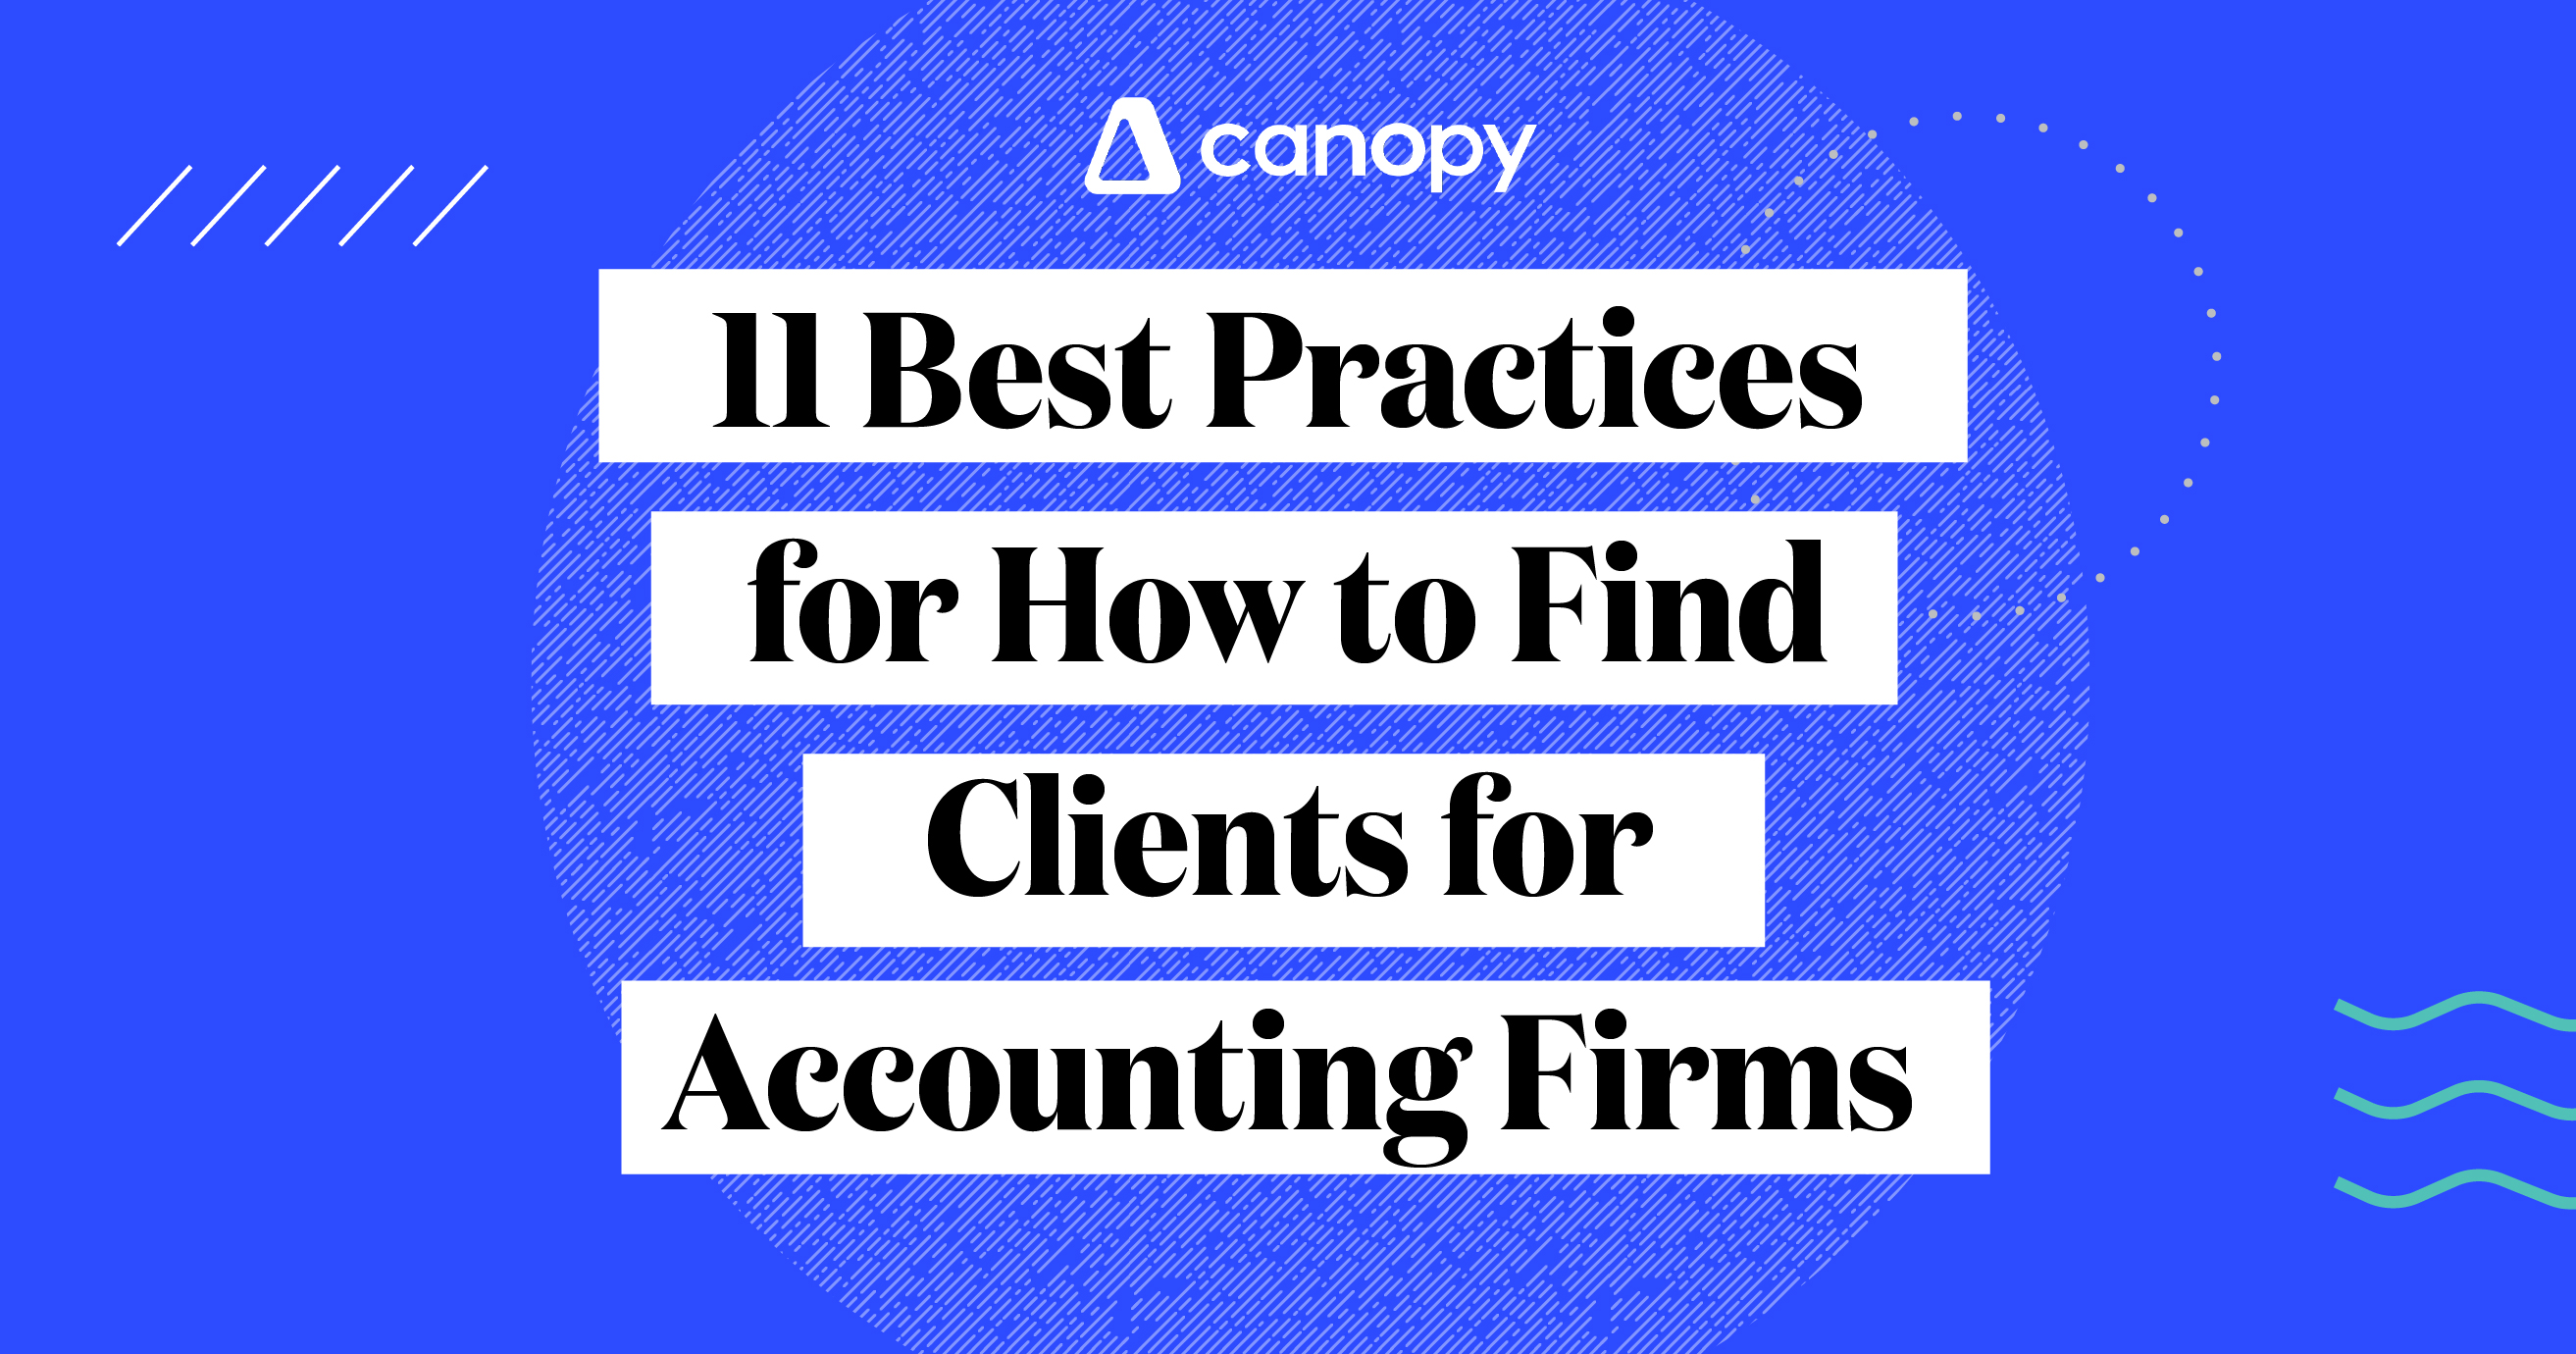 11 Best Practices for How to Find Clients for Accounting Firms